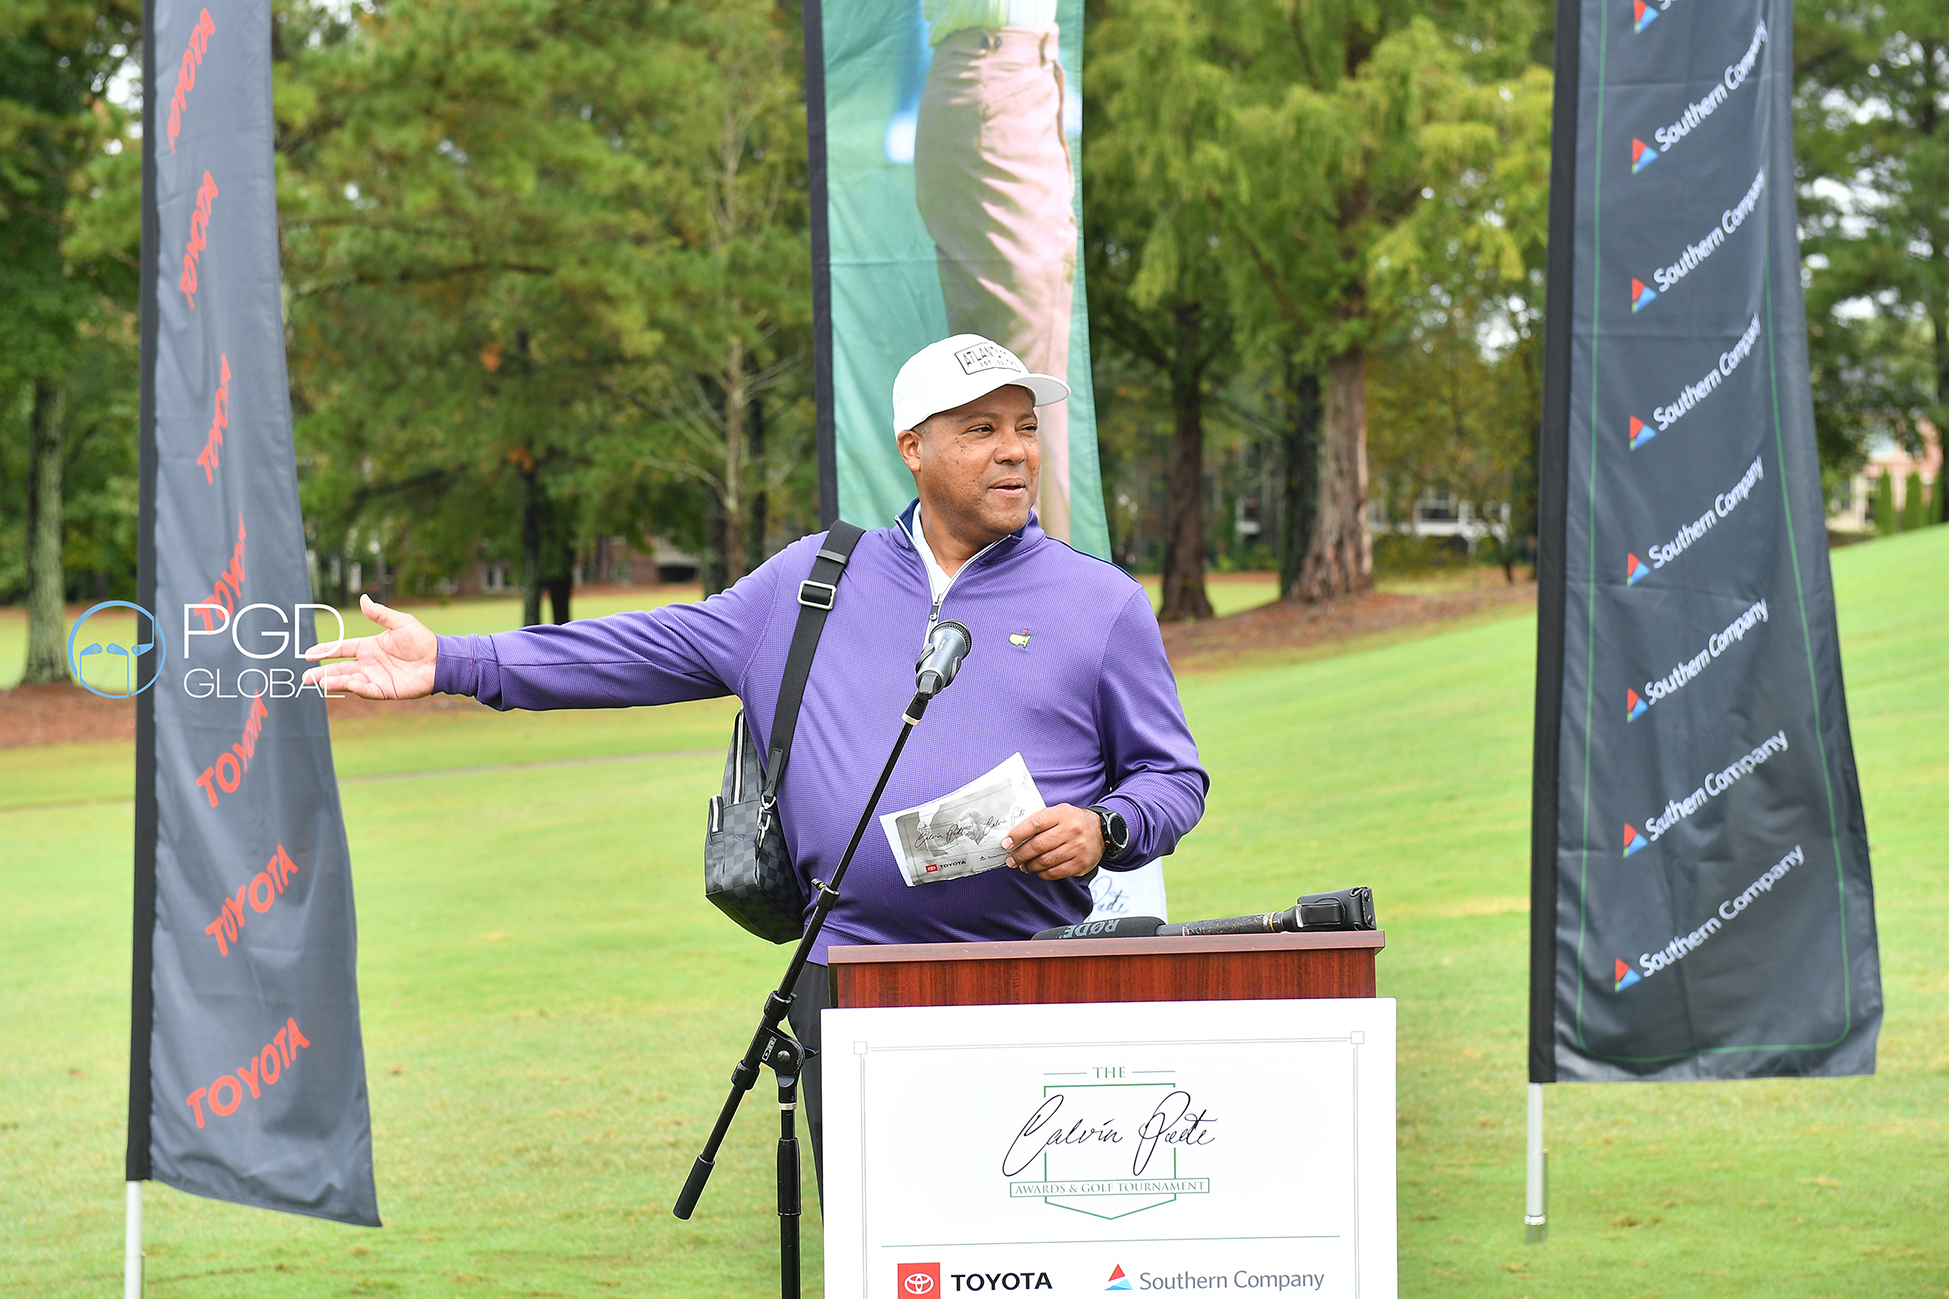 Martin Davis, CIO of Southern Company, speaks about Southern Company's commitment to the game of golf through the Calvin Peete Foundation at the 2020 Calvin Peete Awards & Golf Tournament.